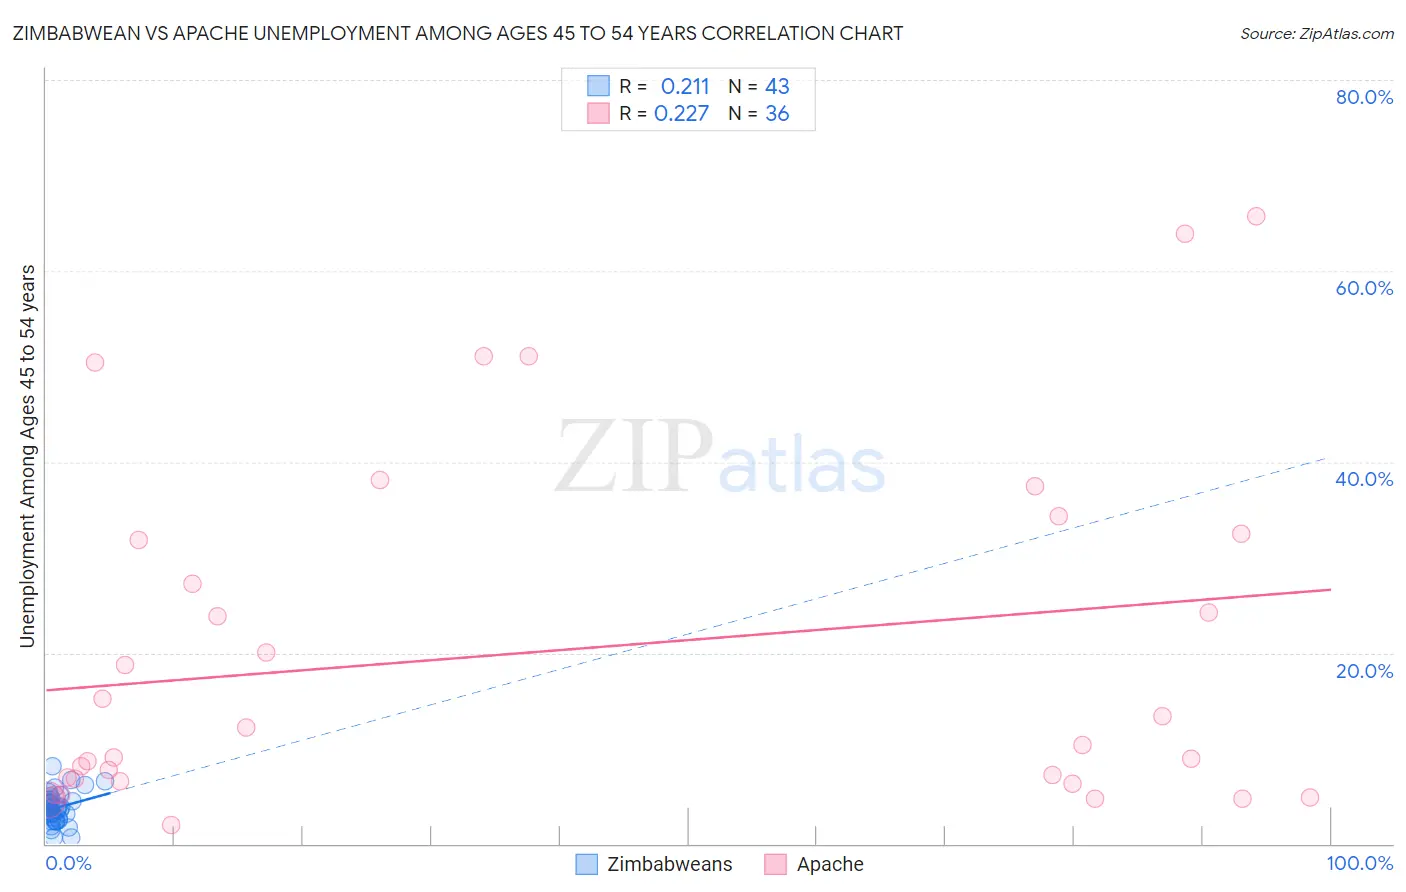 Zimbabwean vs Apache Unemployment Among Ages 45 to 54 years